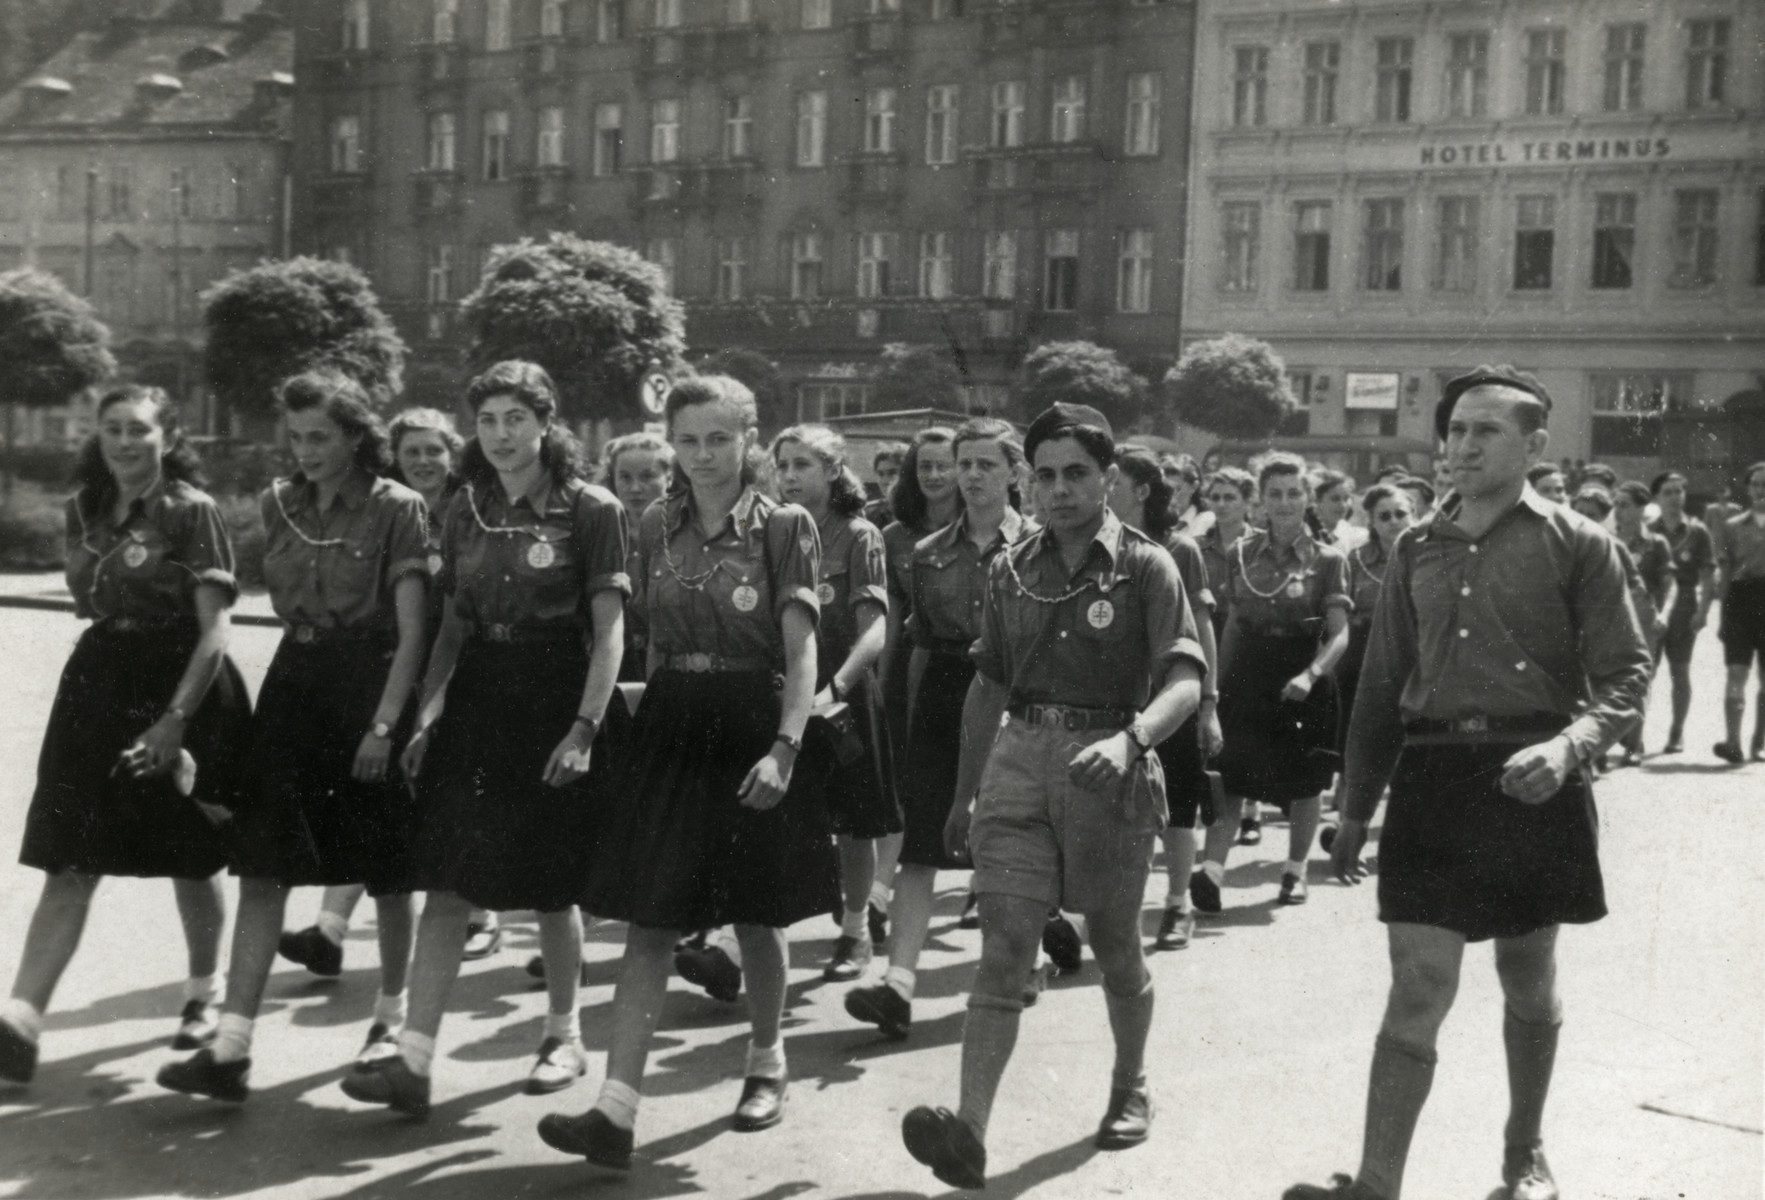 Zionist youth parade in Karlovy Vary.